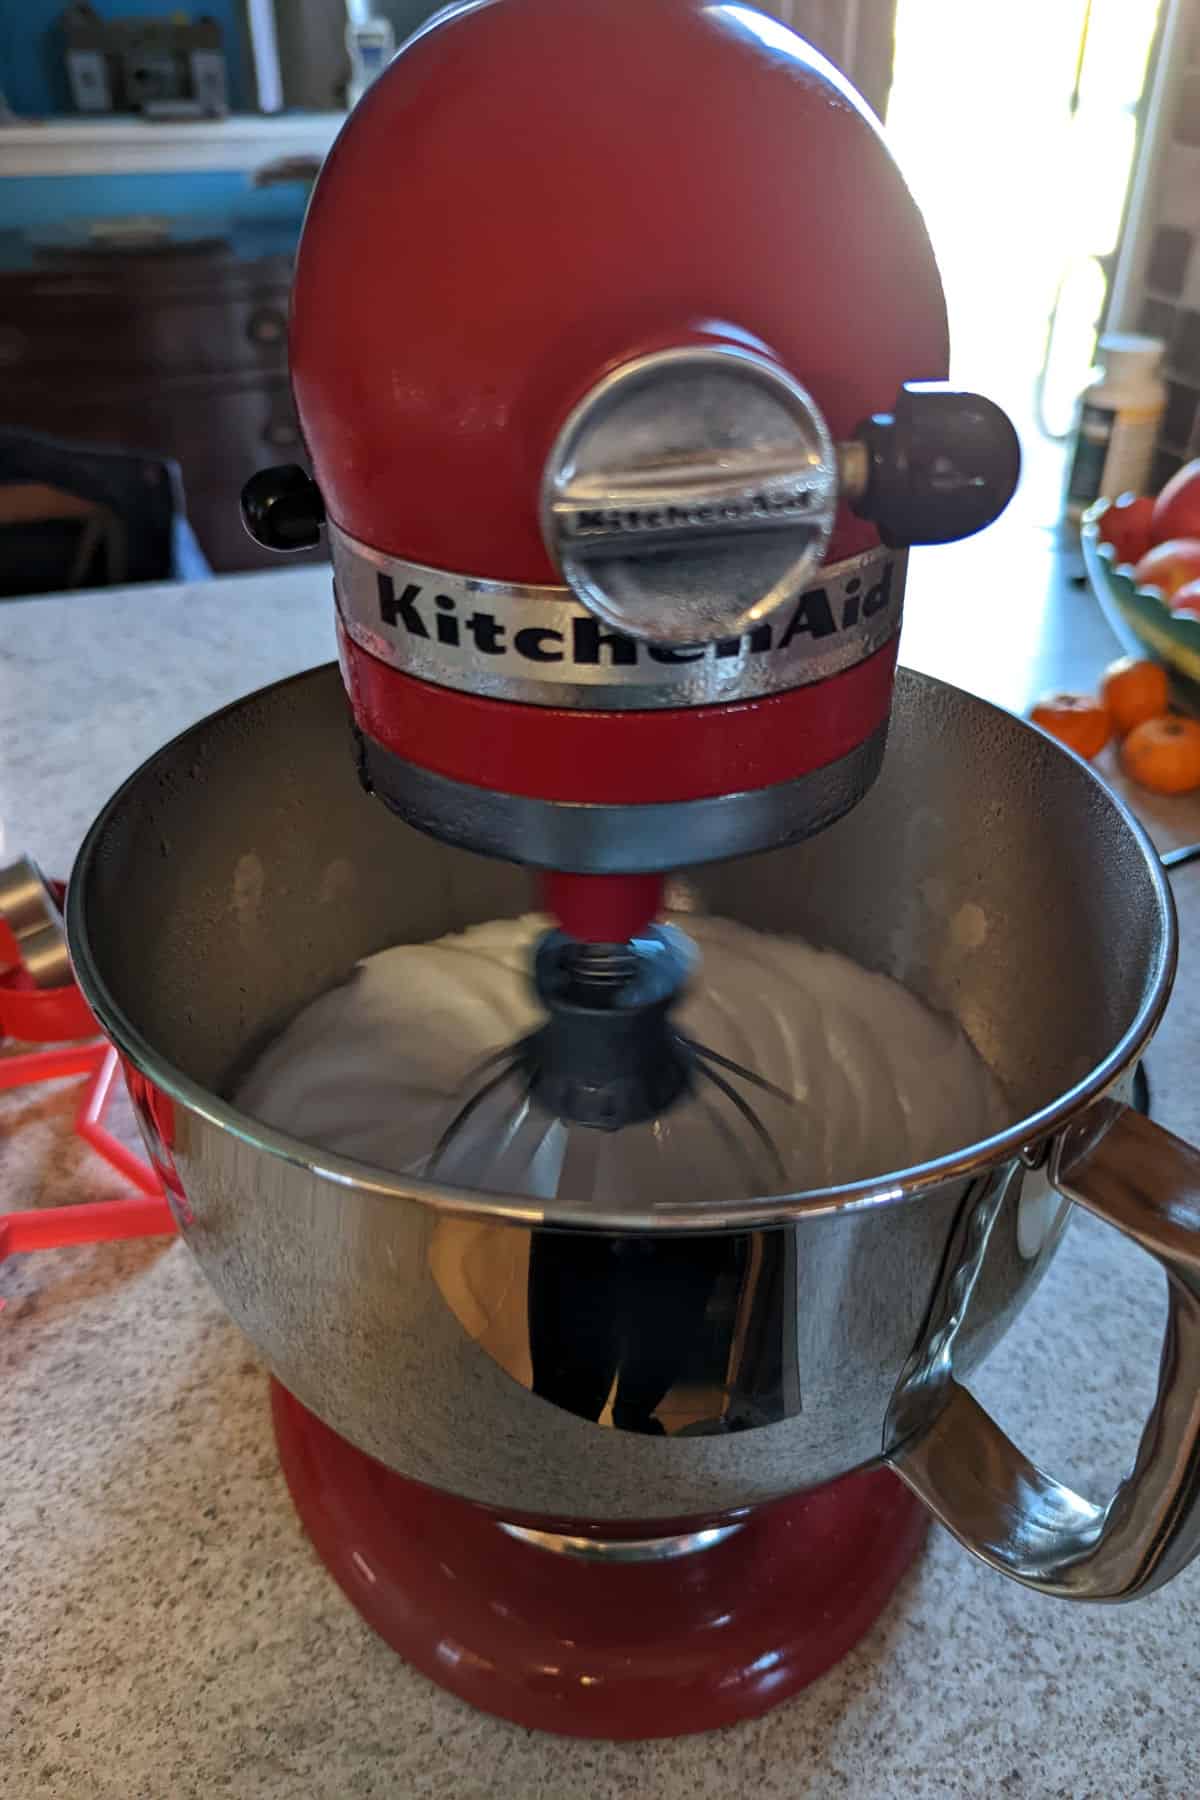 marshmallow fluff in stand mixer while whipping, having become foamy after 2 minutes